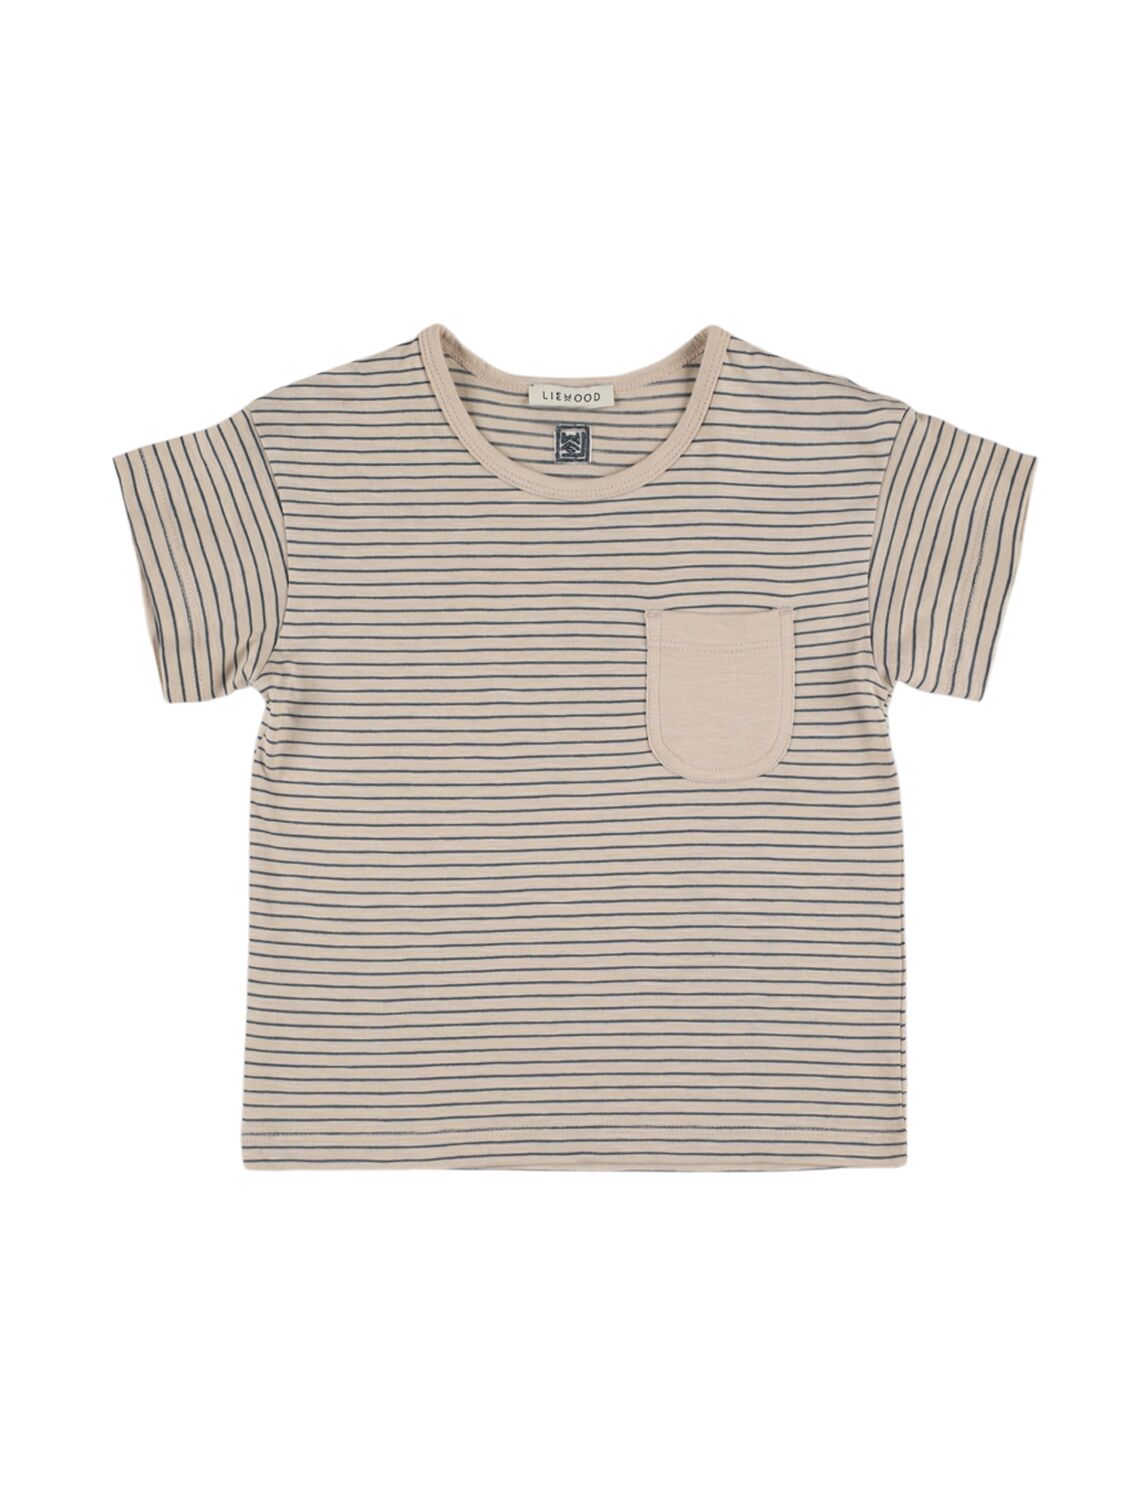 Liewood Kids' Striped Organic Cotton T-shirt In Multicolor